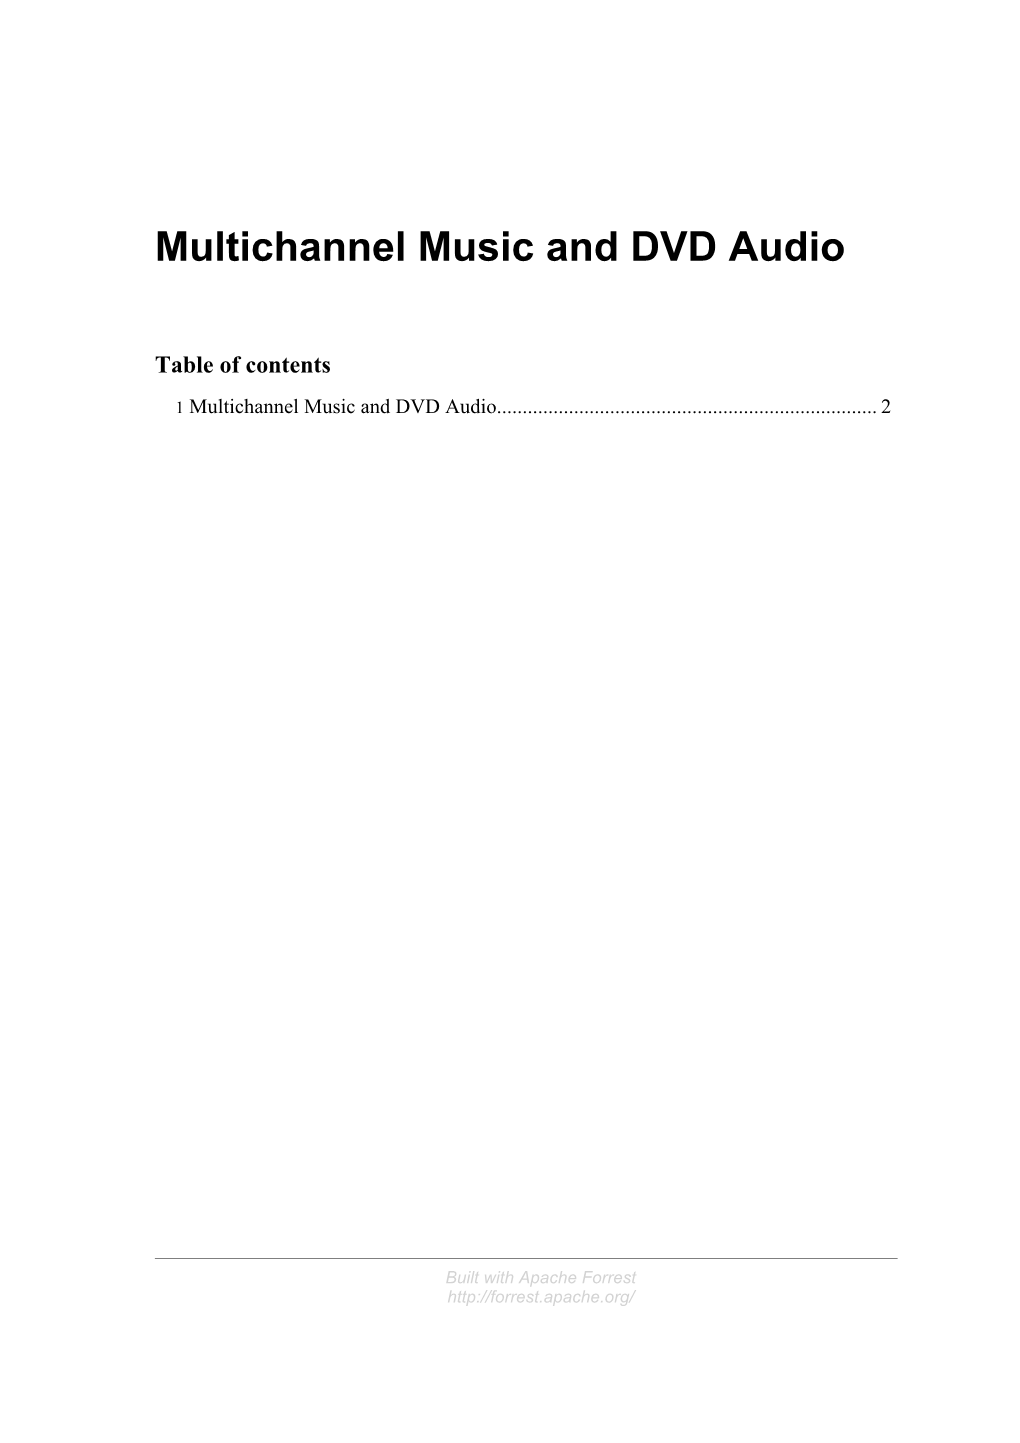 Multichannel Music and DVD Audio